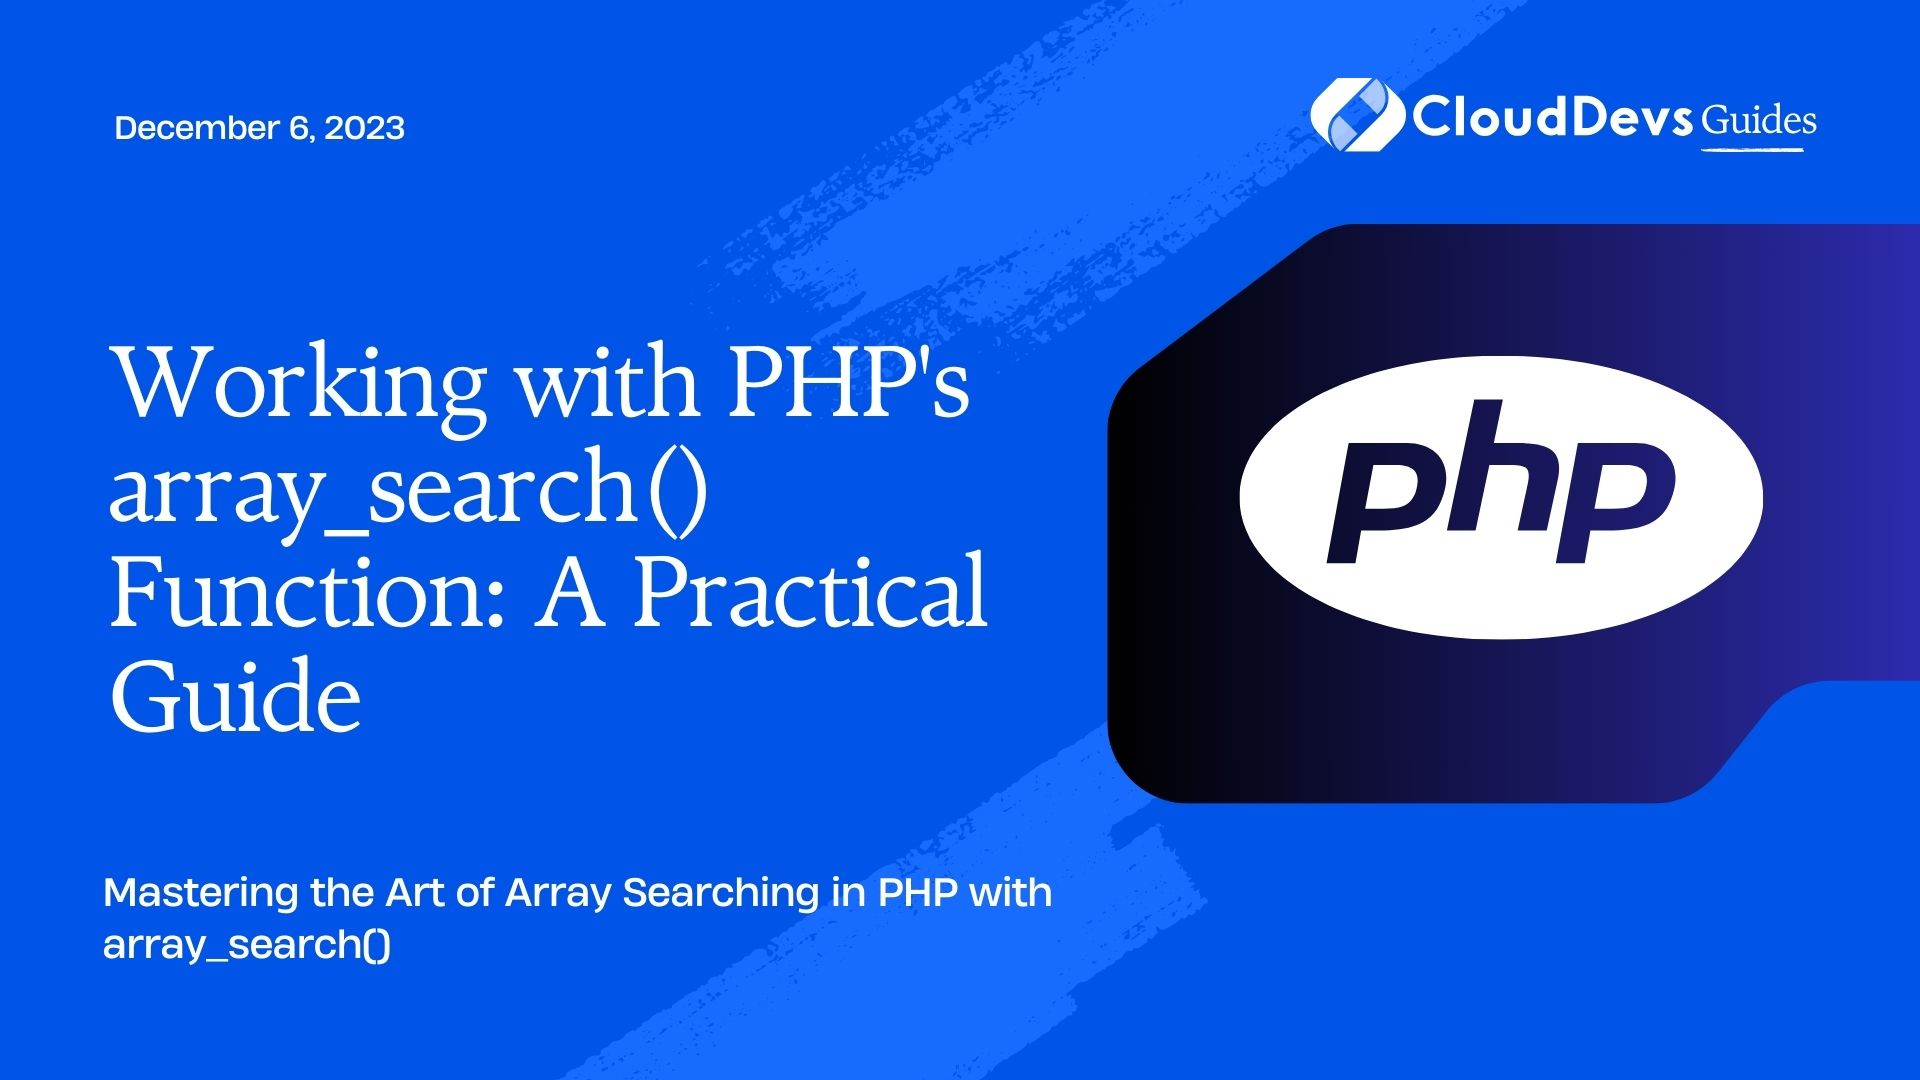 Working with PHP's array_search() Function: A Practical Guide